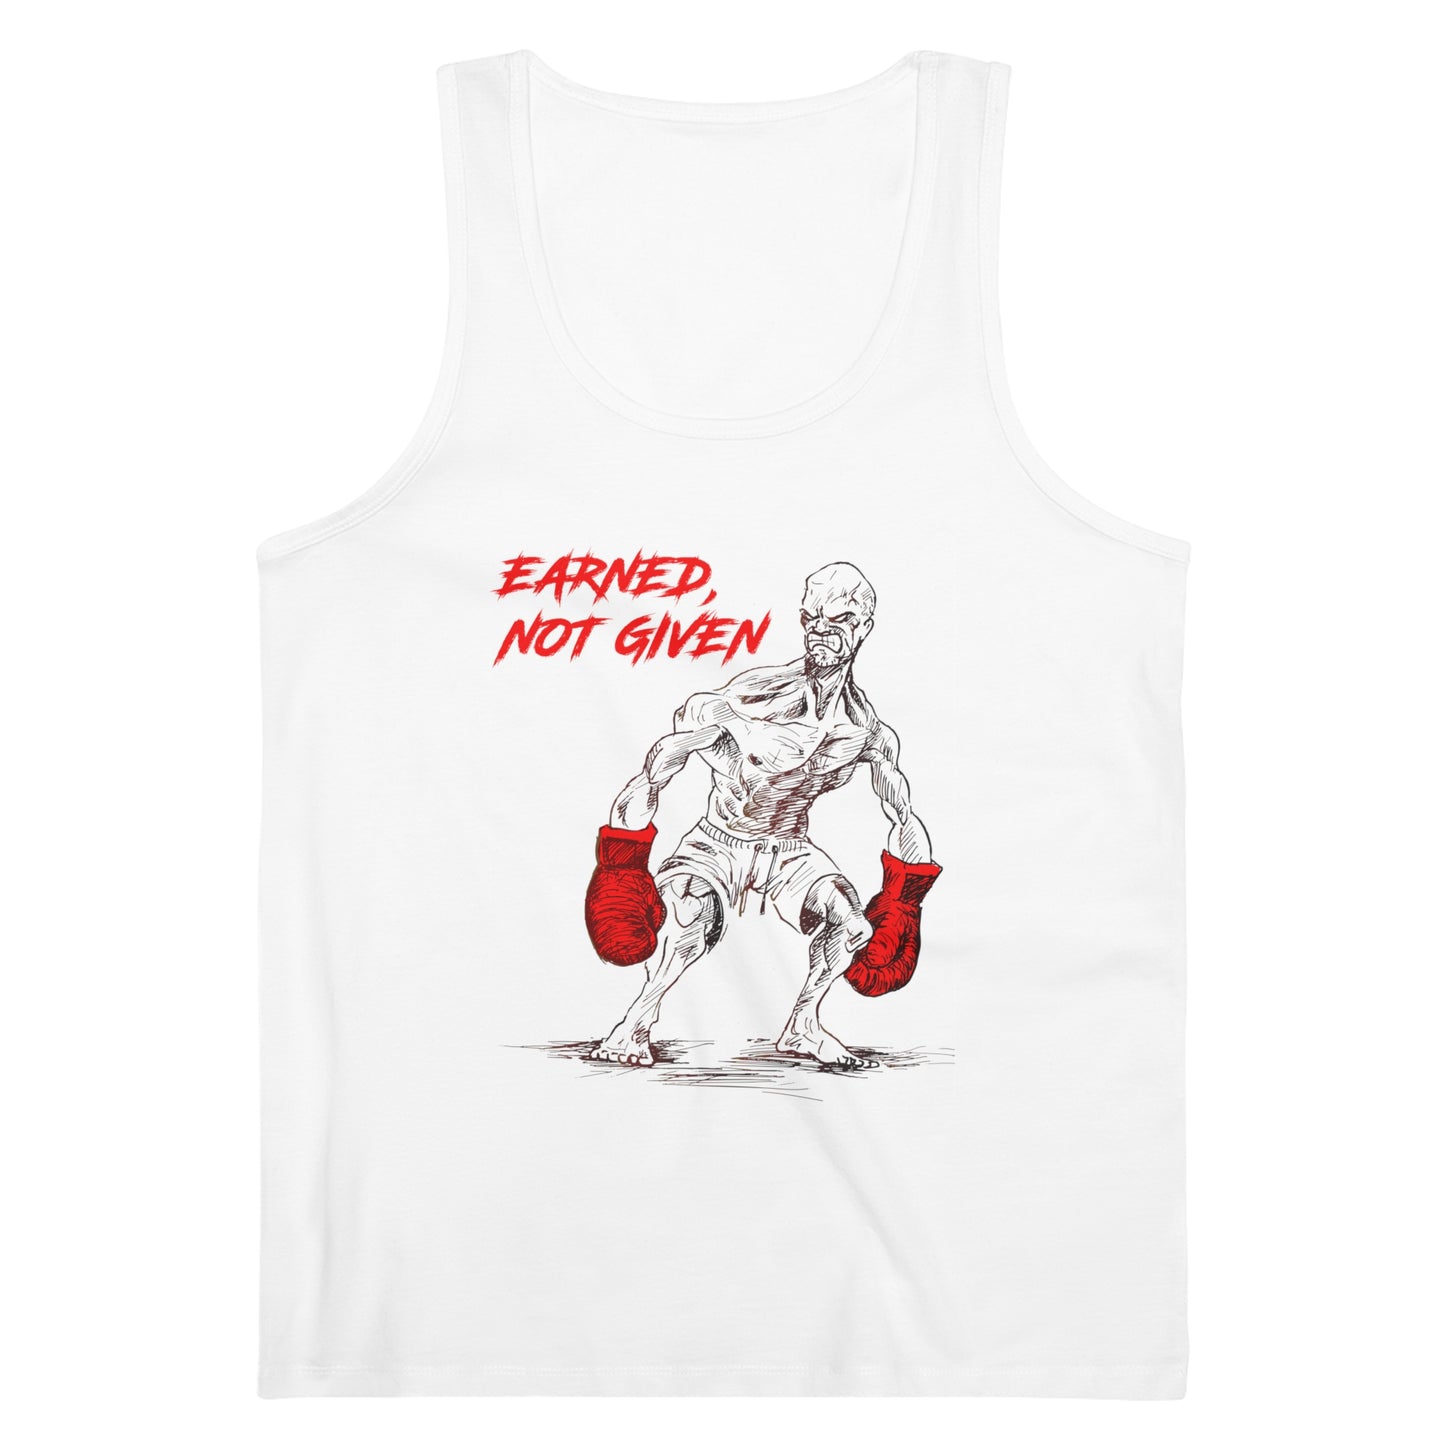 EARNED NOT GIVEN x Tank